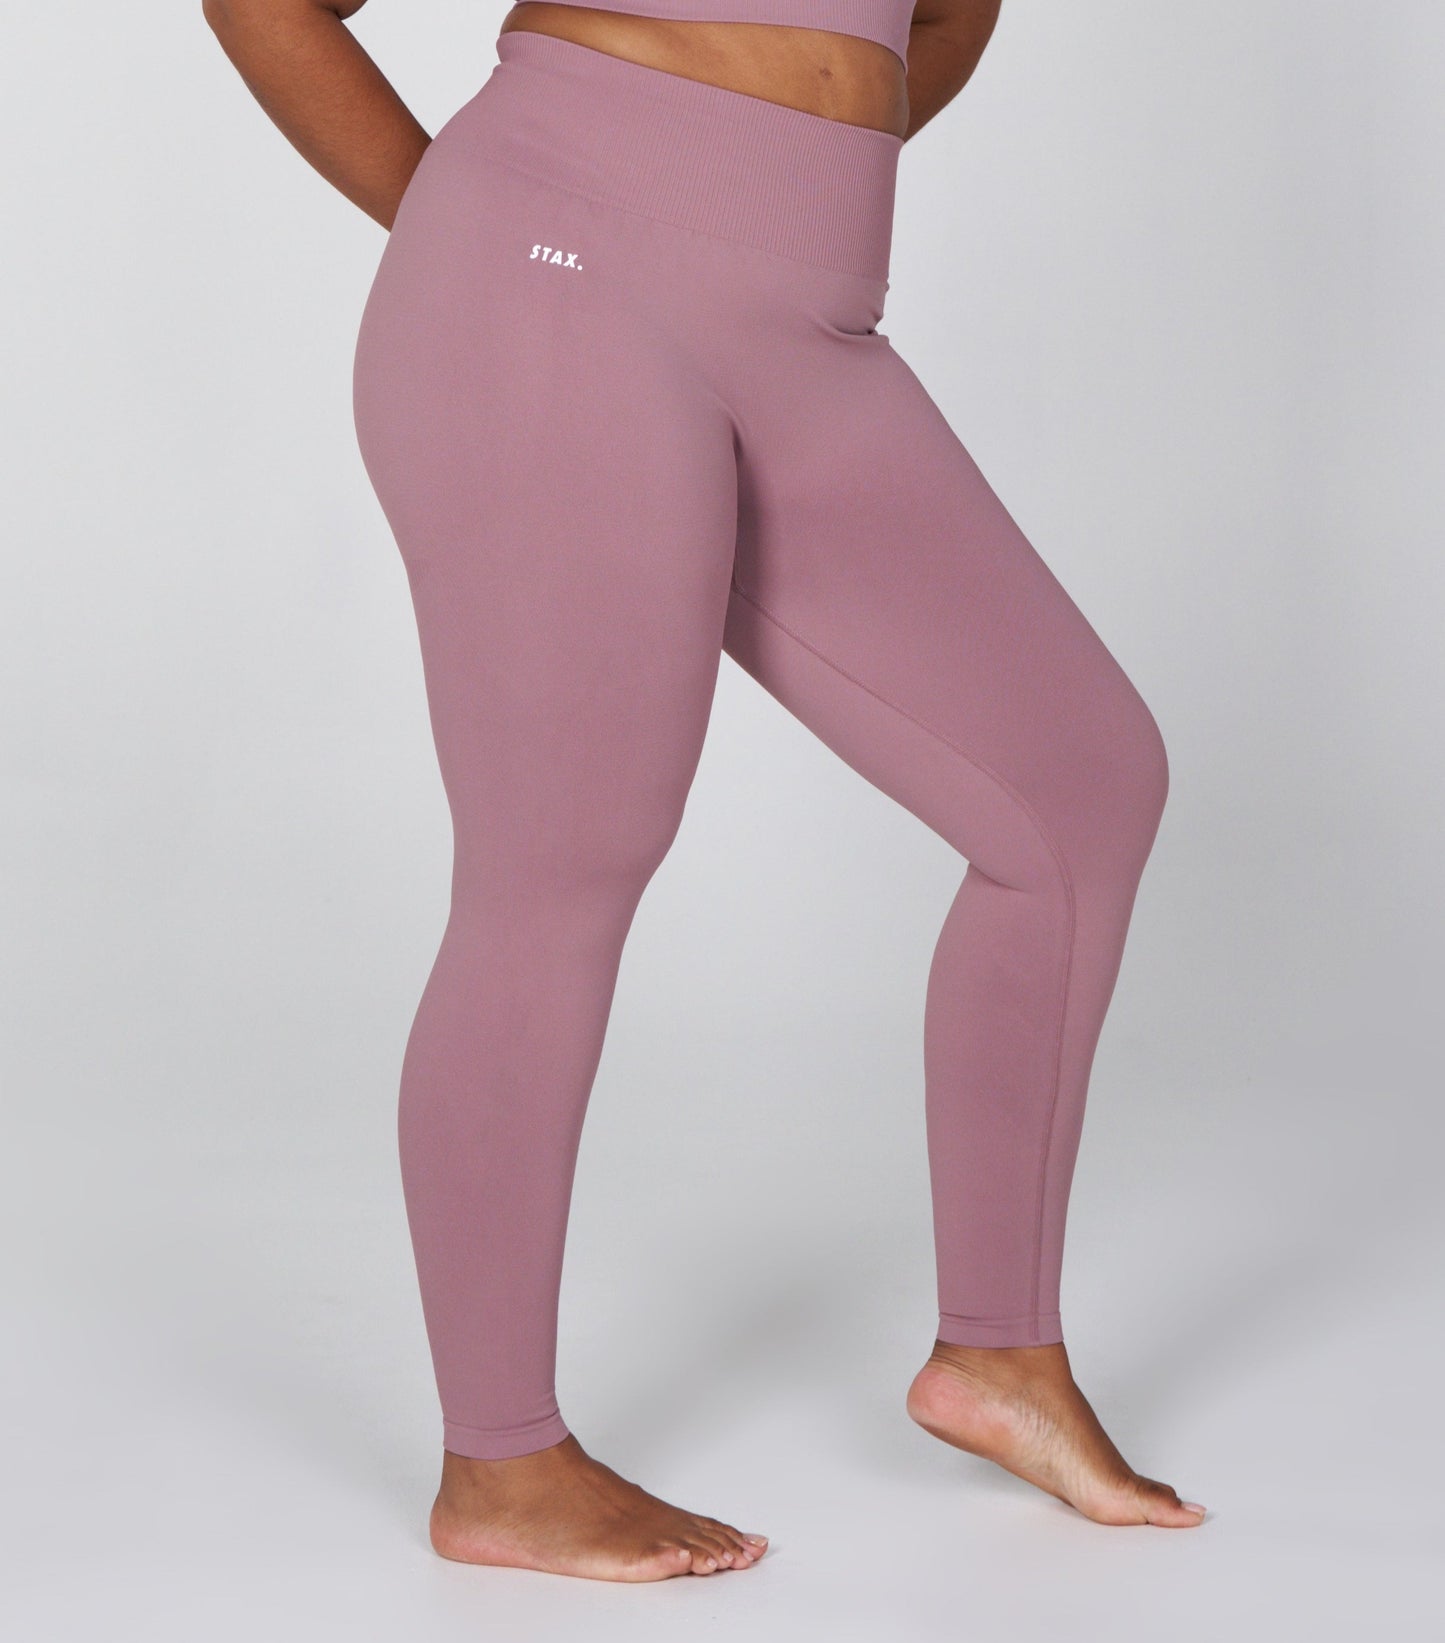 Premium Seamless Favourites Tights - Dusty Rose